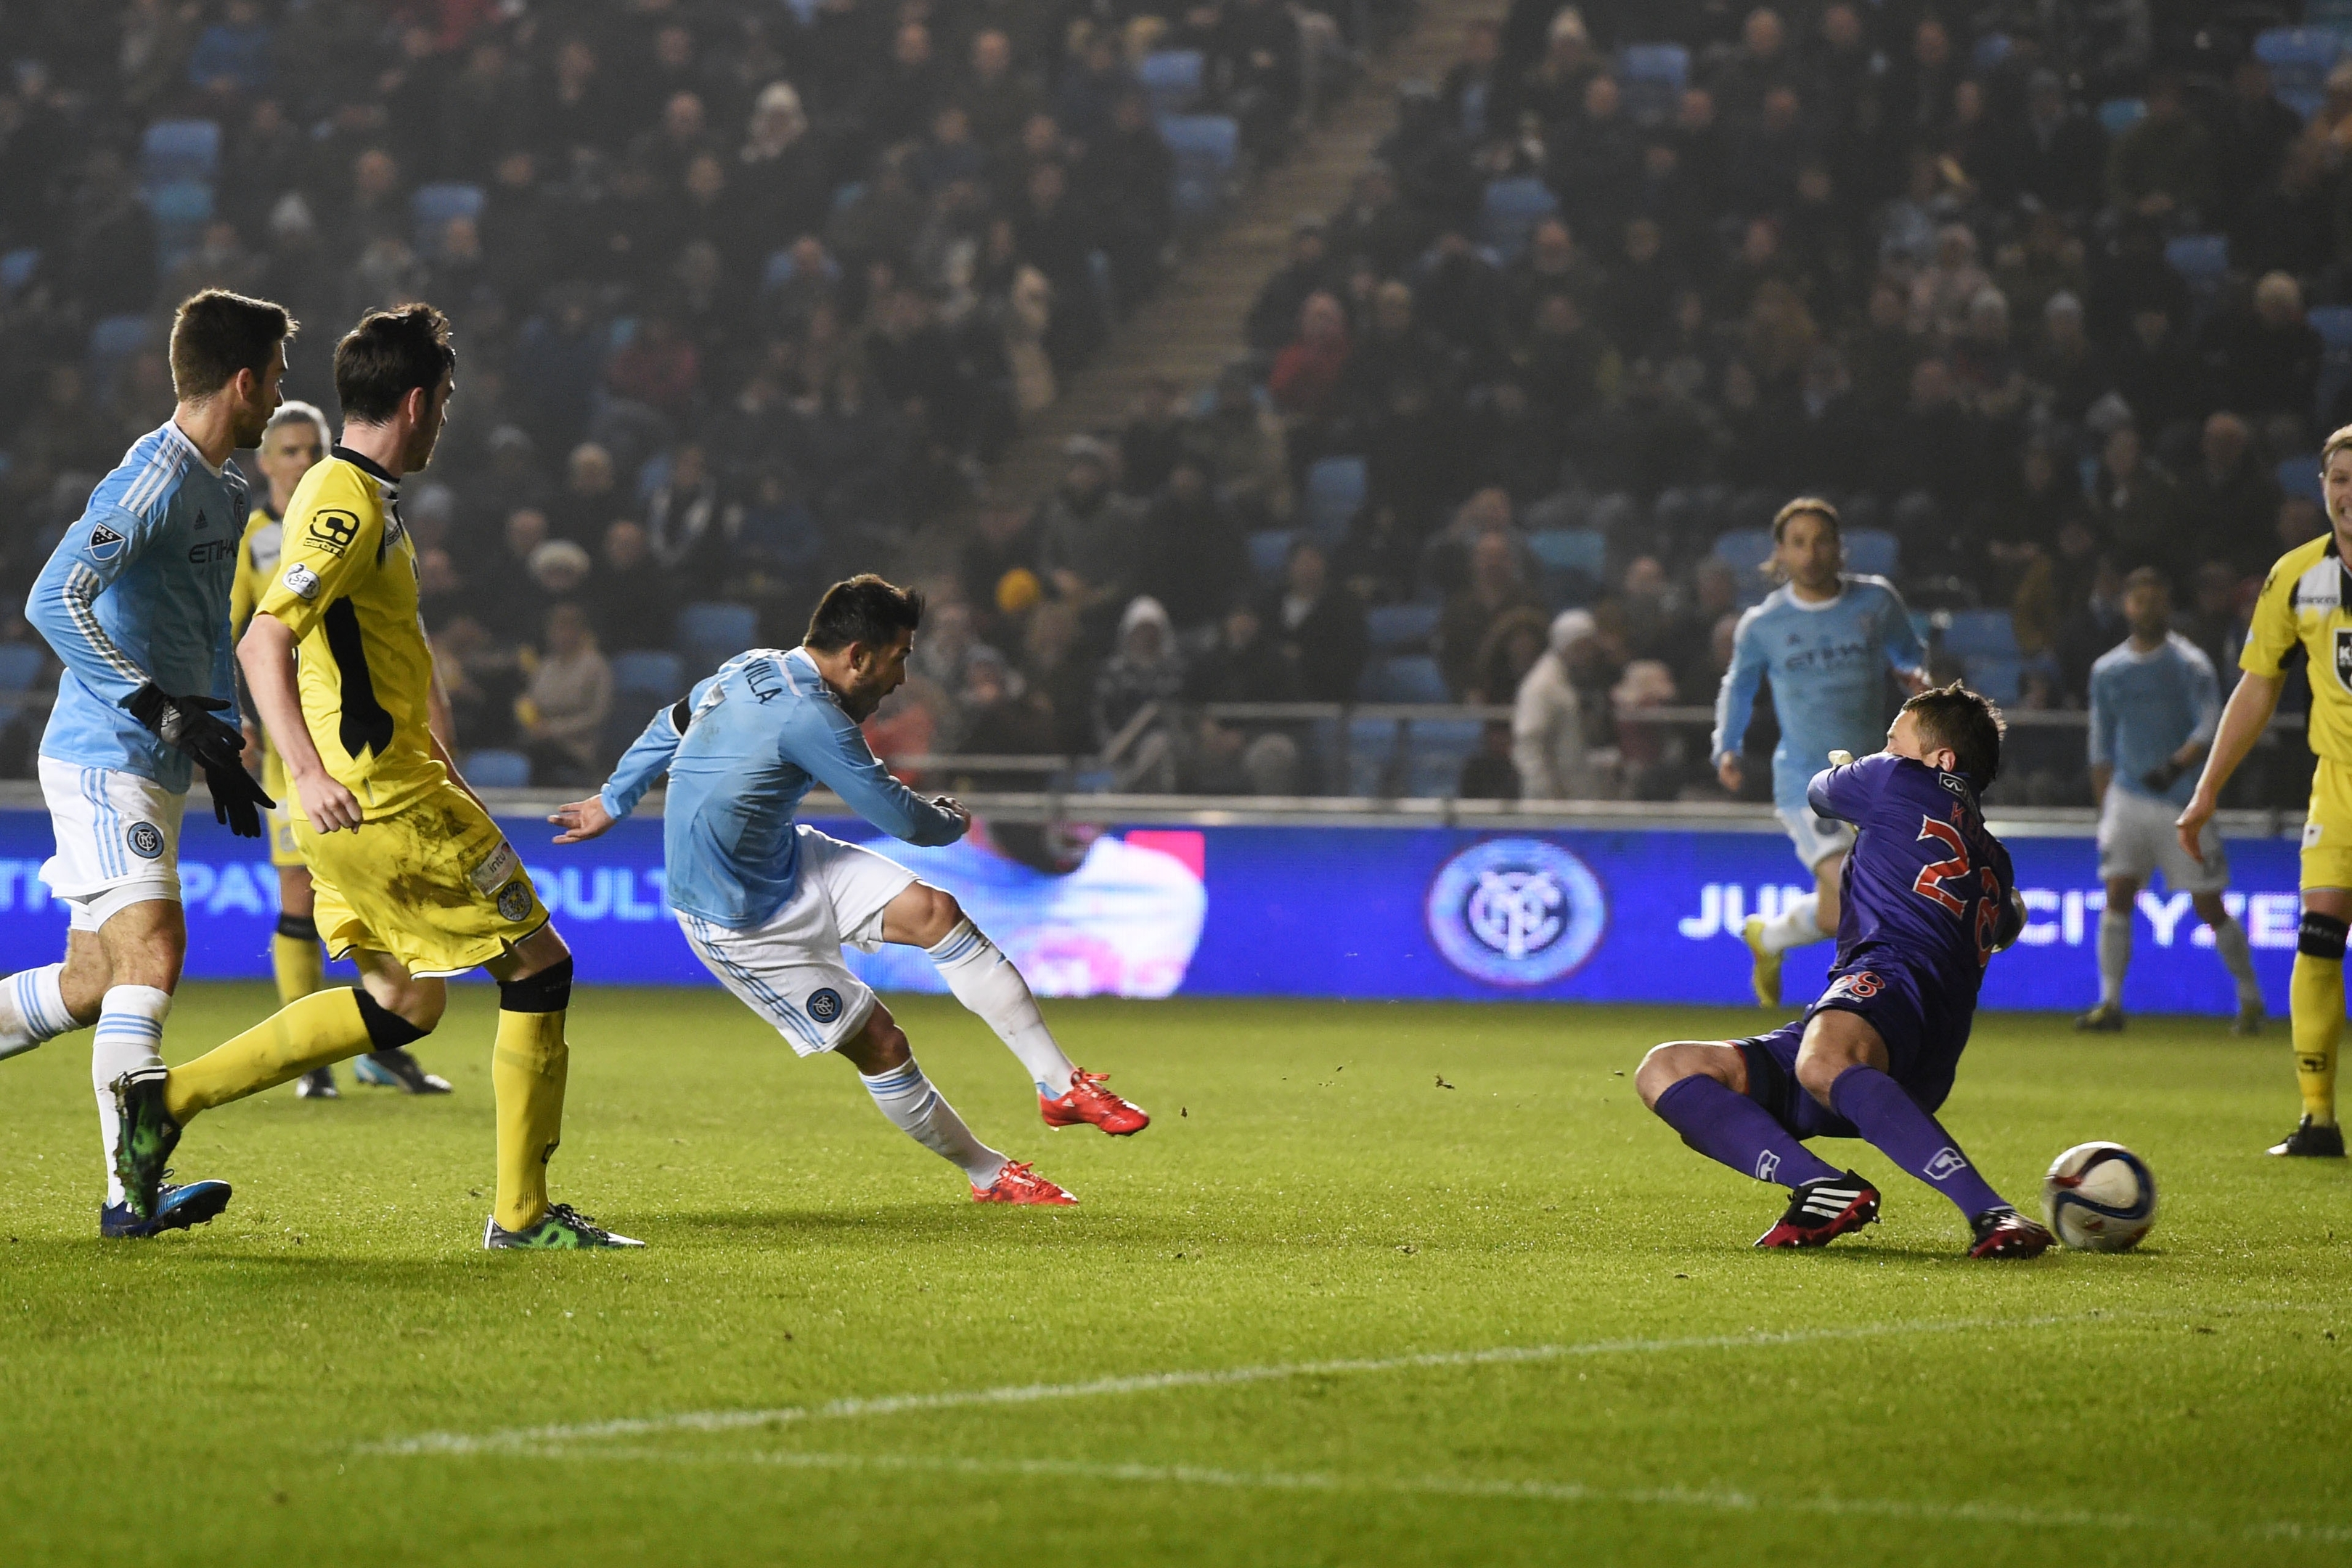 This goal this evening was the first time David Villa had ever scored against the Buddies